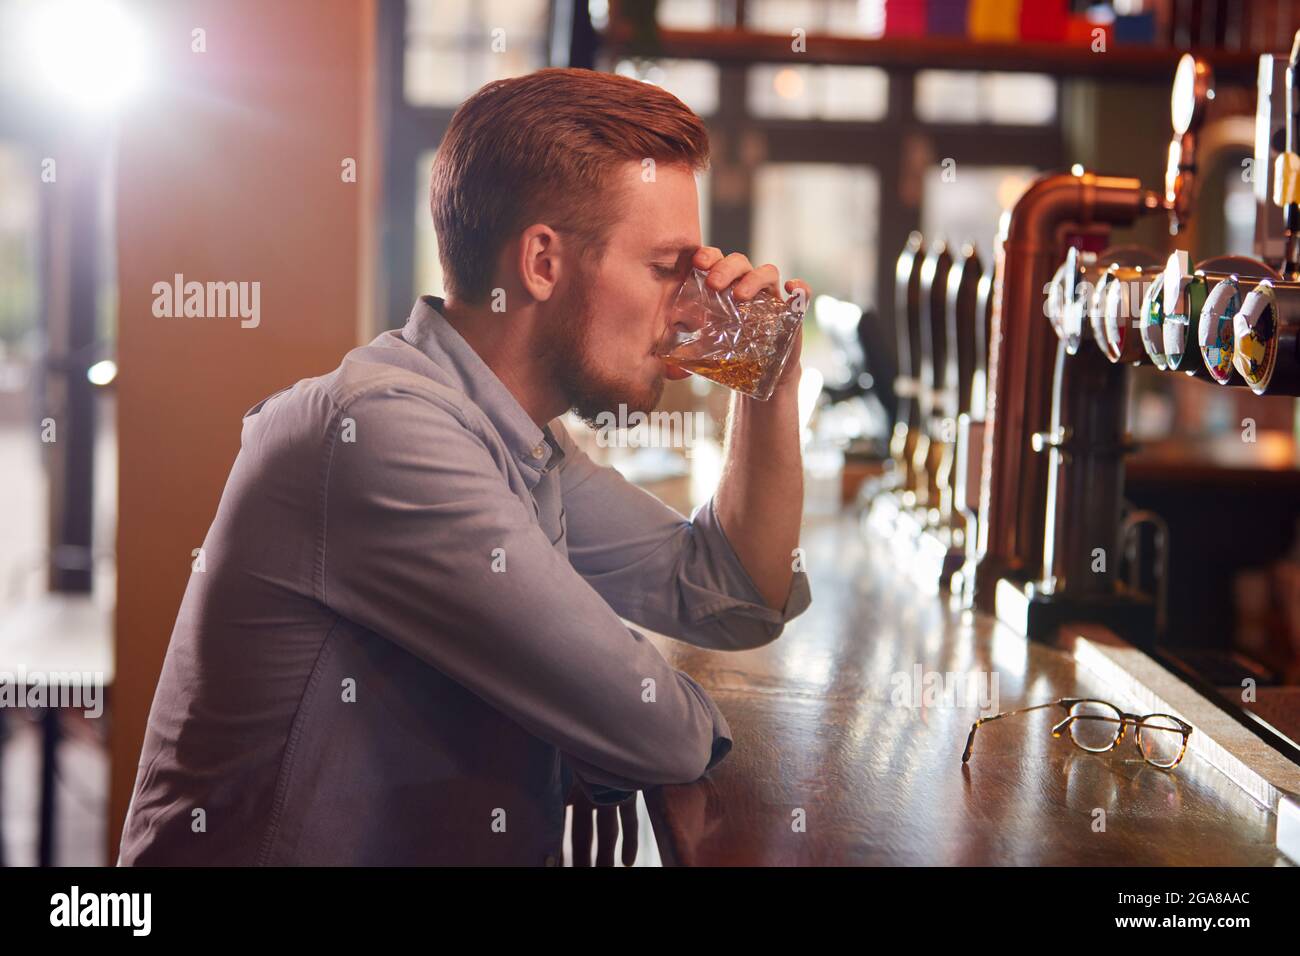 Unhappy Man Sitting At Pub Bar Drinking Alone With Glass Of Whisky Stock Photo